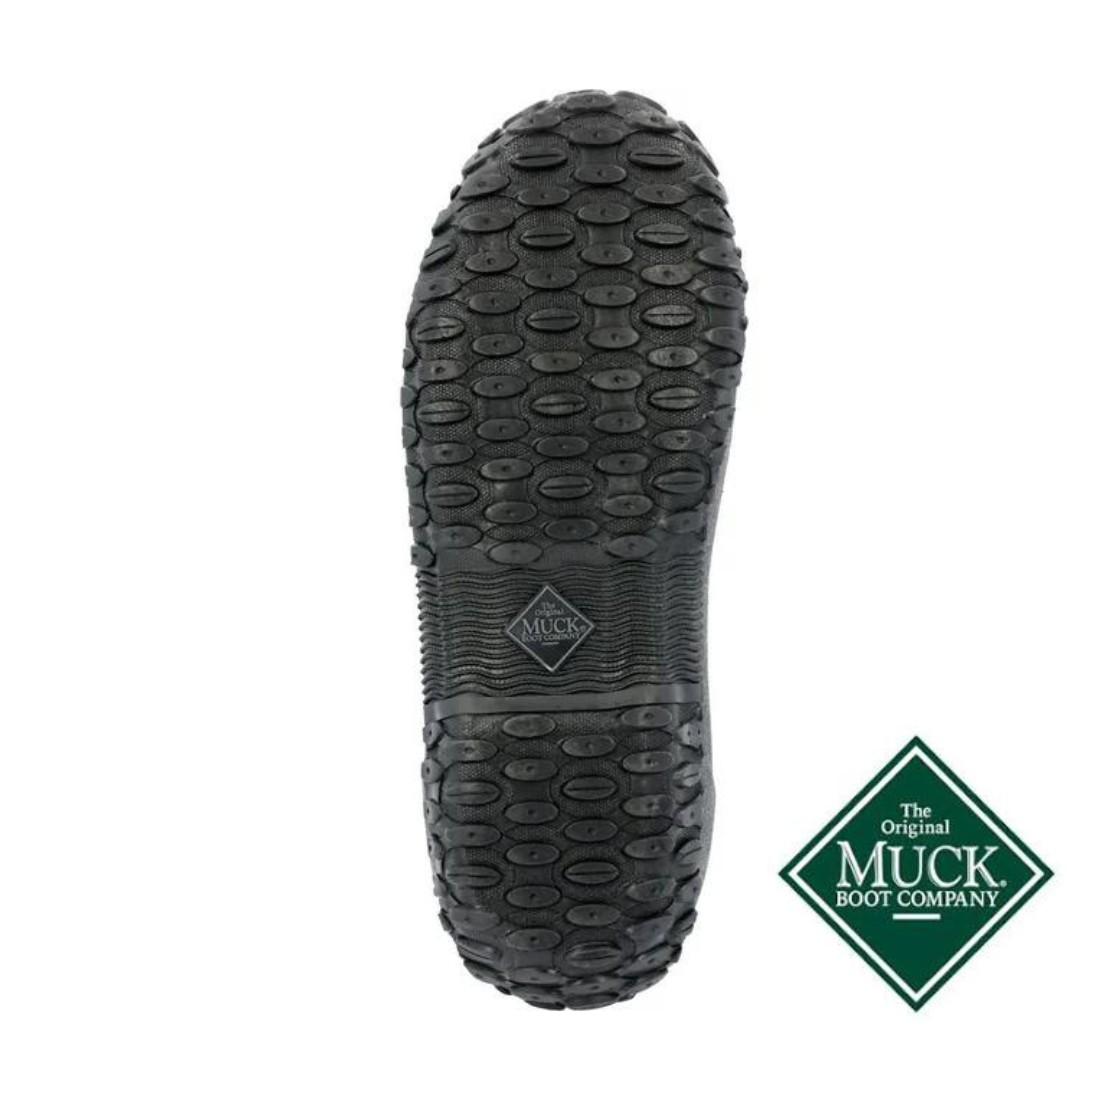 Muckster Waterproof Ankle Work Boots Workboots by Muck Boots | The Bloke Shop